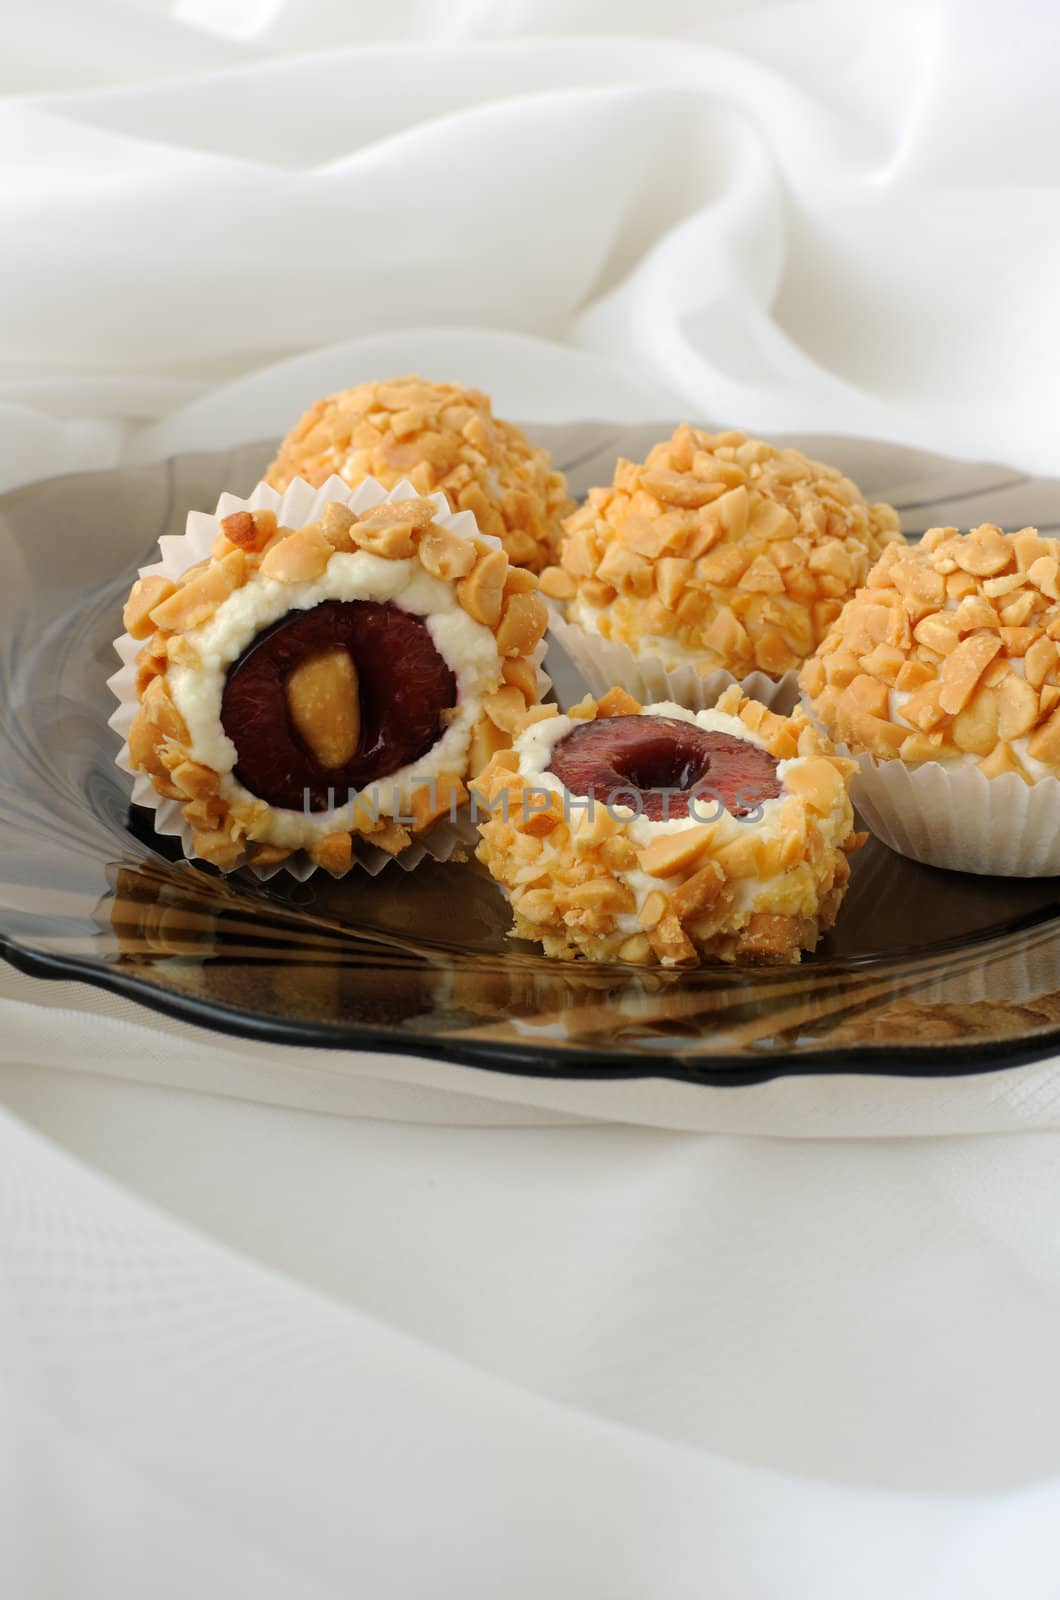 Cheese balls with cherries in peanuts by Apolonia